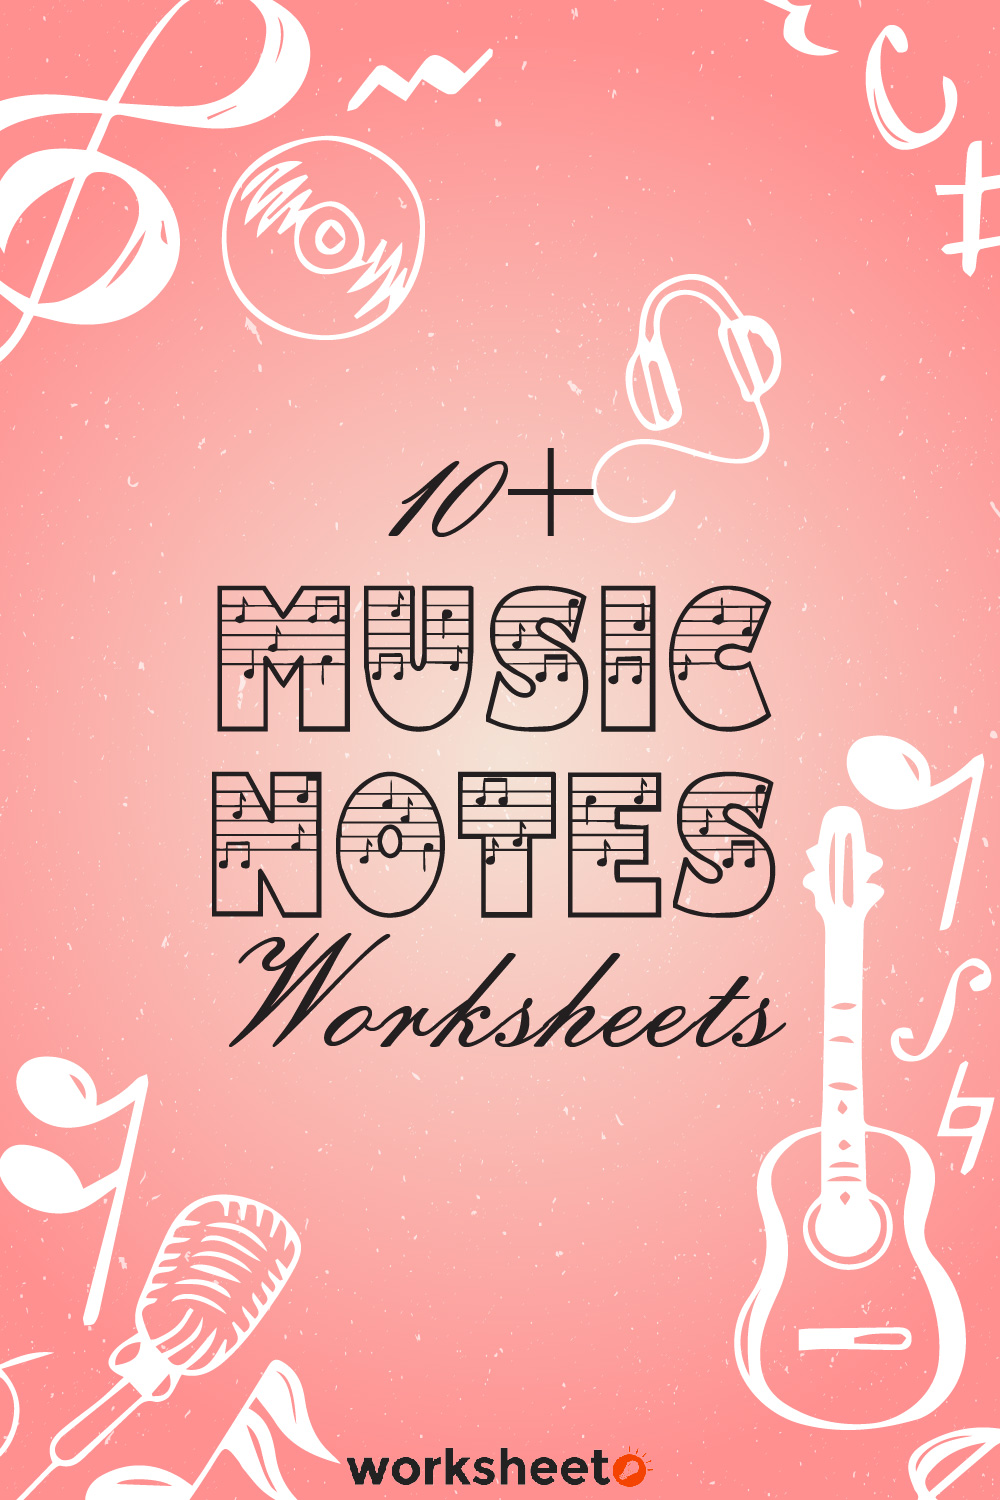 10 Images of Music Notes Worksheets